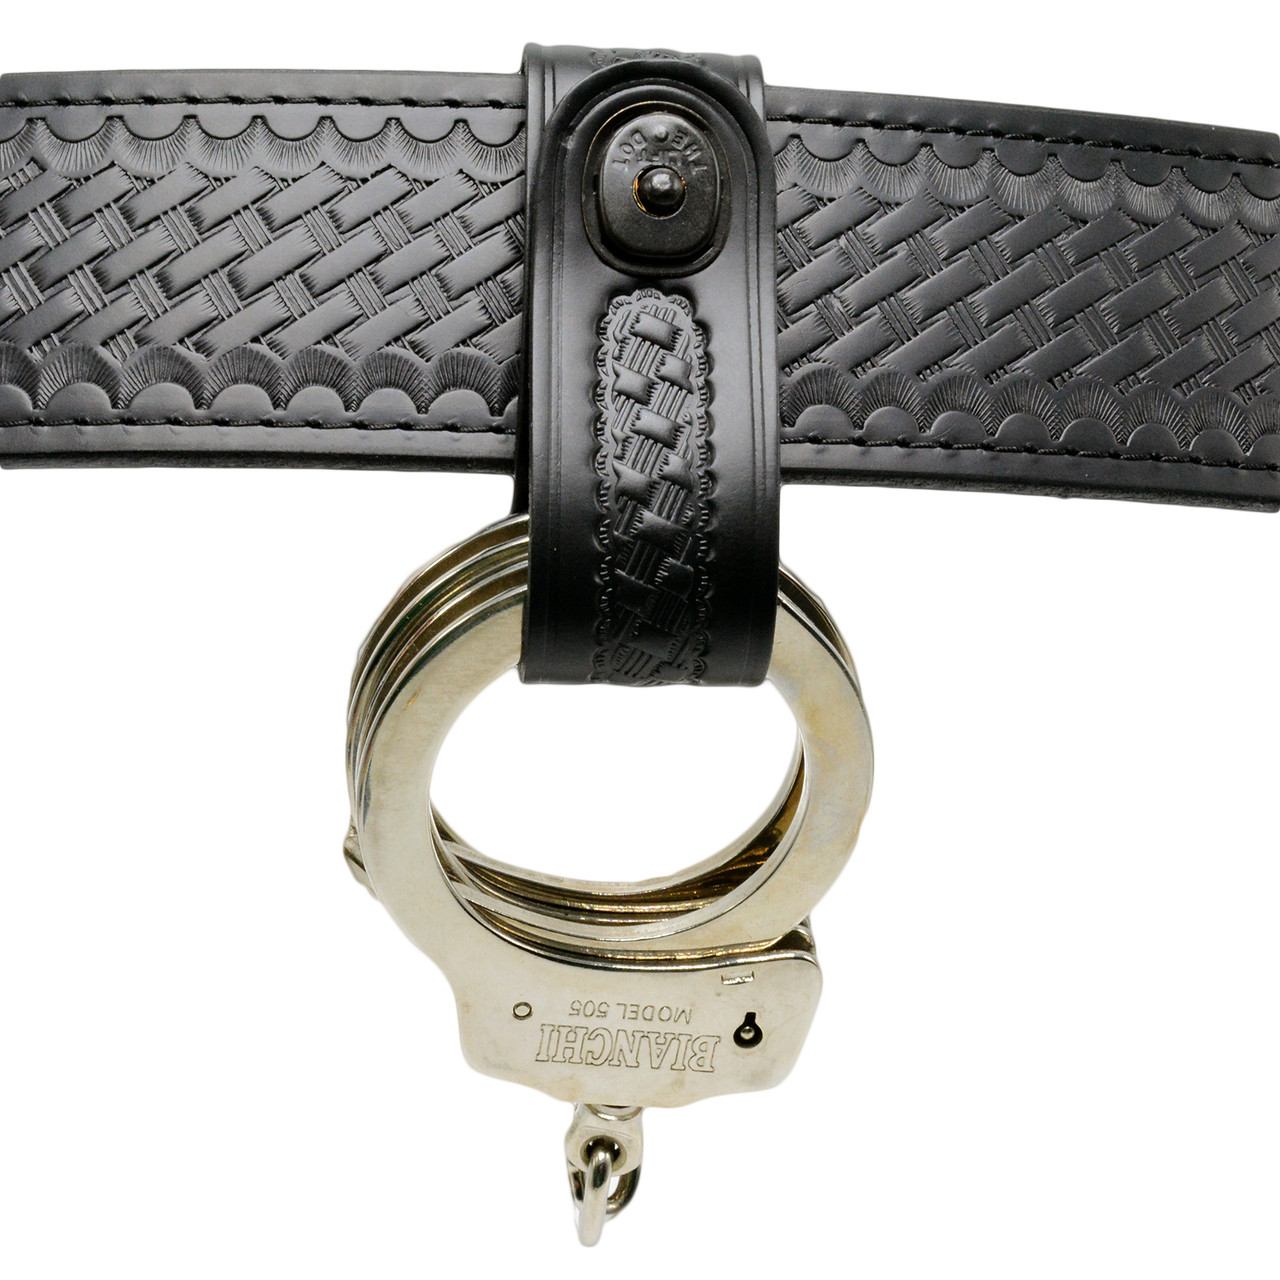 Unmarked Leather Strap Duty Belt Handcuff Holster Holder with Hand Cuffs 1  Key